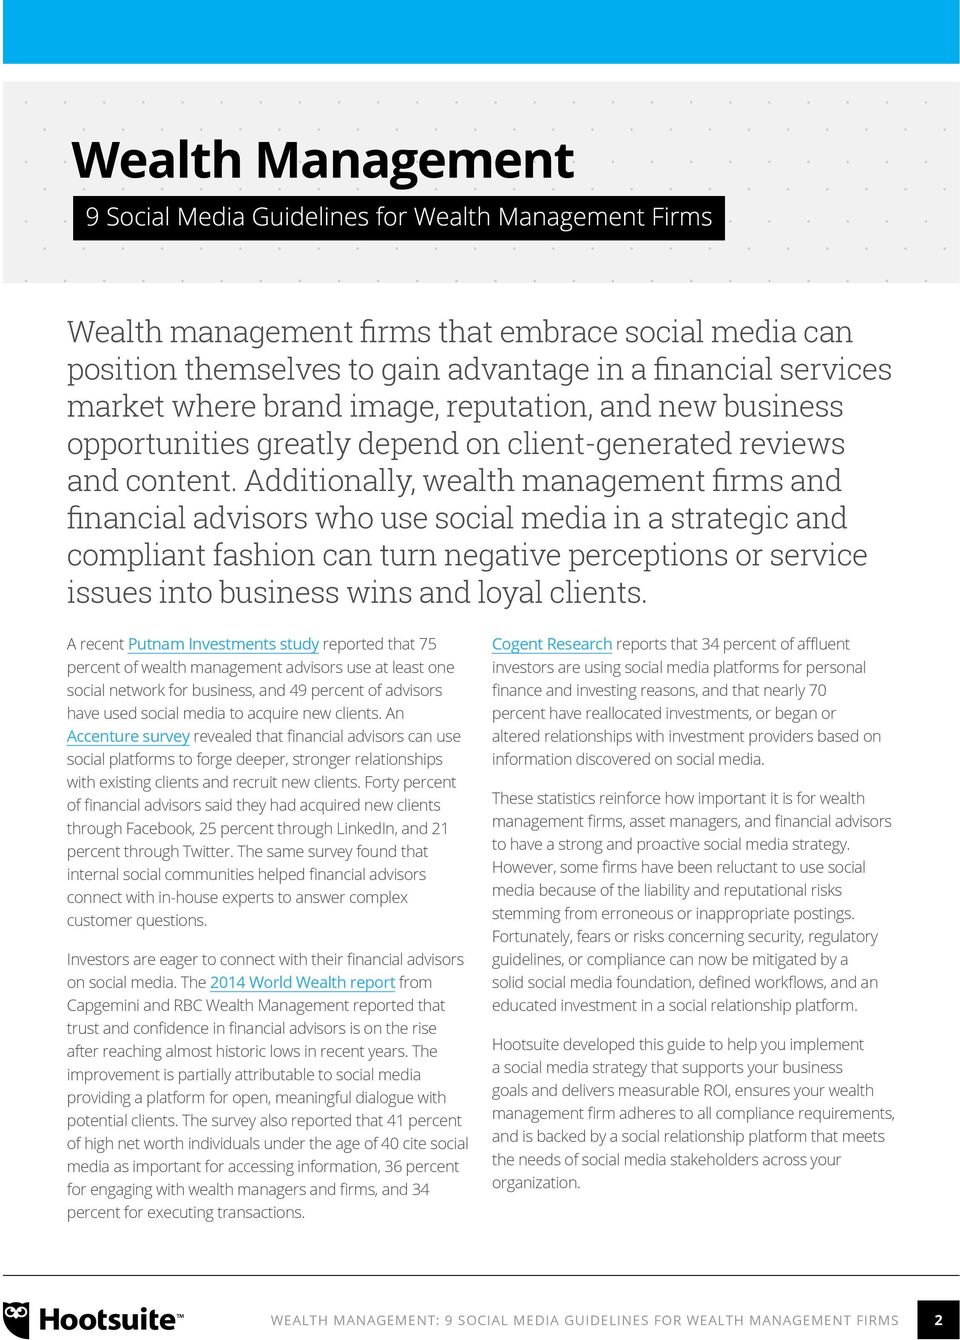 Additionally, wealth management firms and financial advisors who use social media in a strategic and compliant fashion can turn negative perceptions or service issues into business wins and loyal